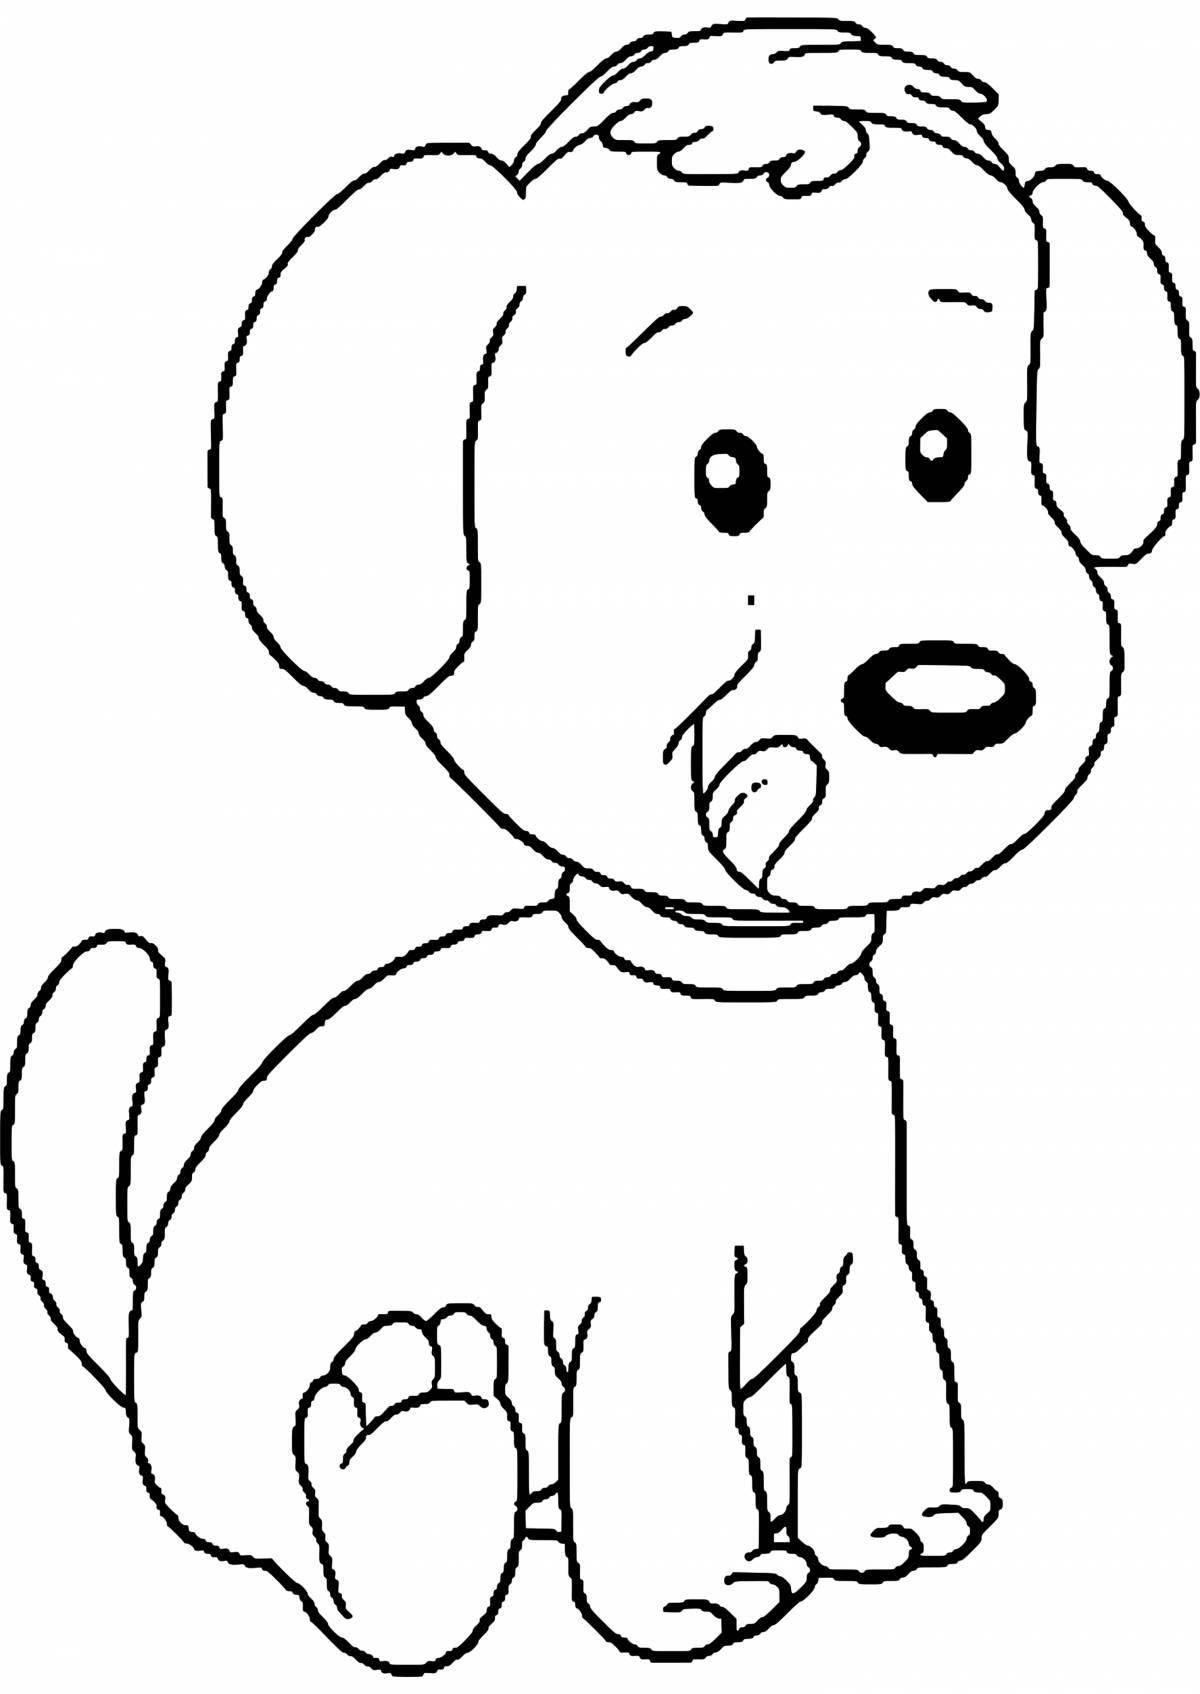 Entertaining dog coloring book for children 4-5 years old